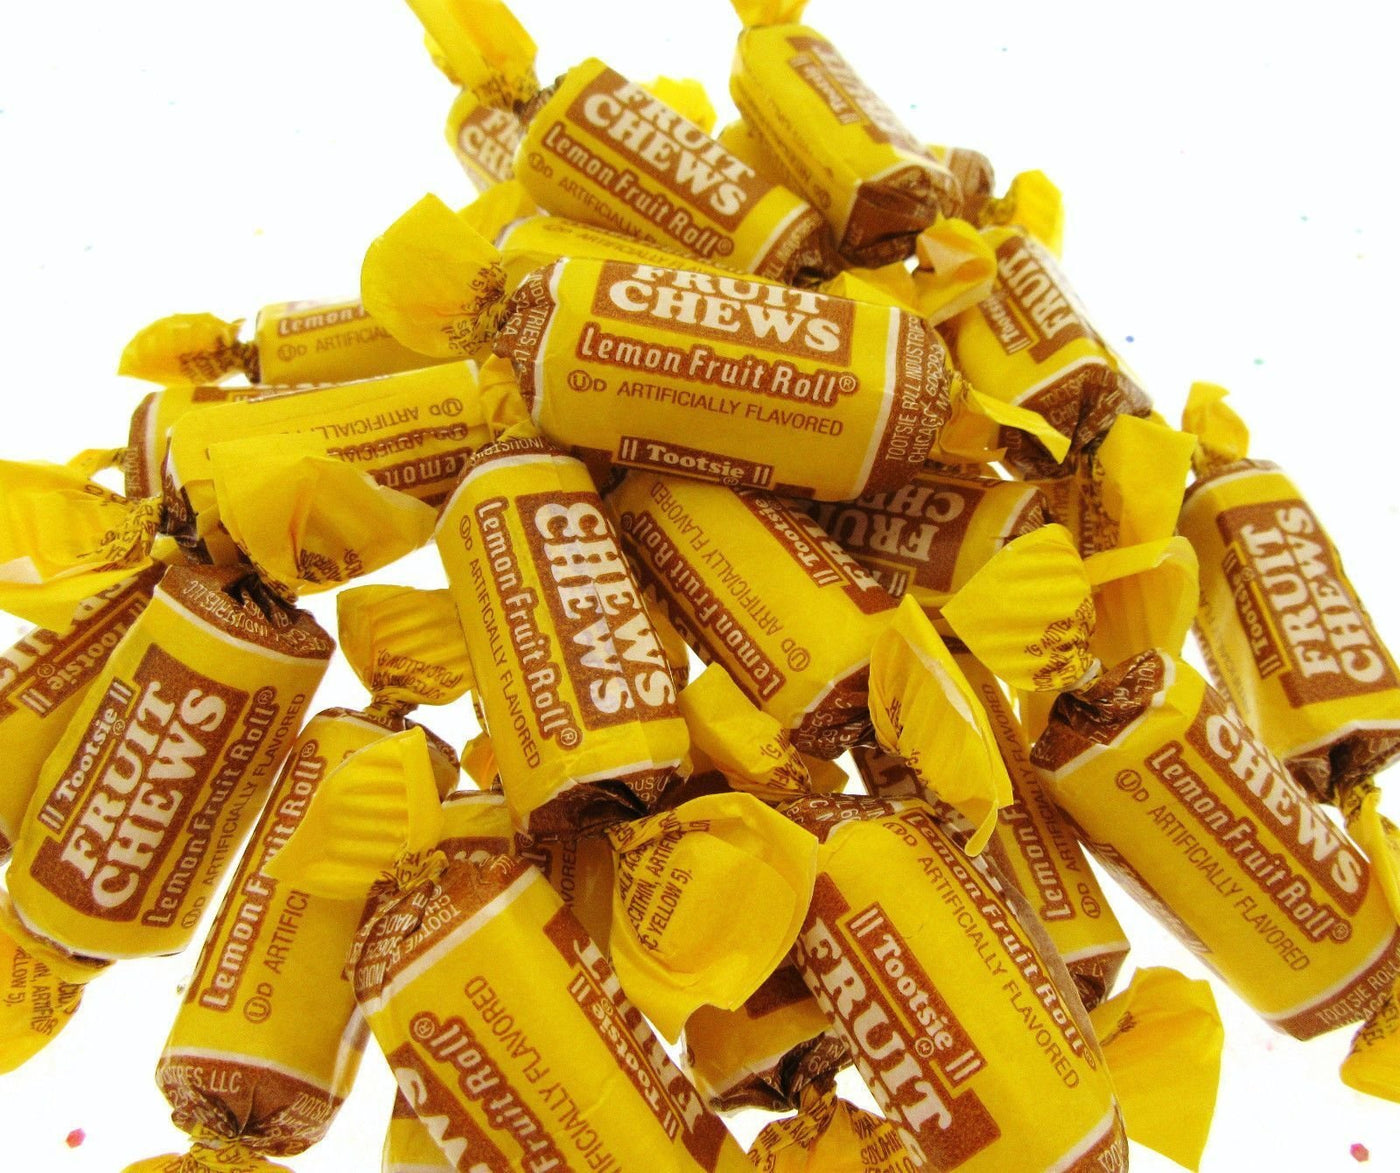 Tootsie Roll Lemon Two Pounds 2lbs Fruit Chews Candy Candies ~ 32oz